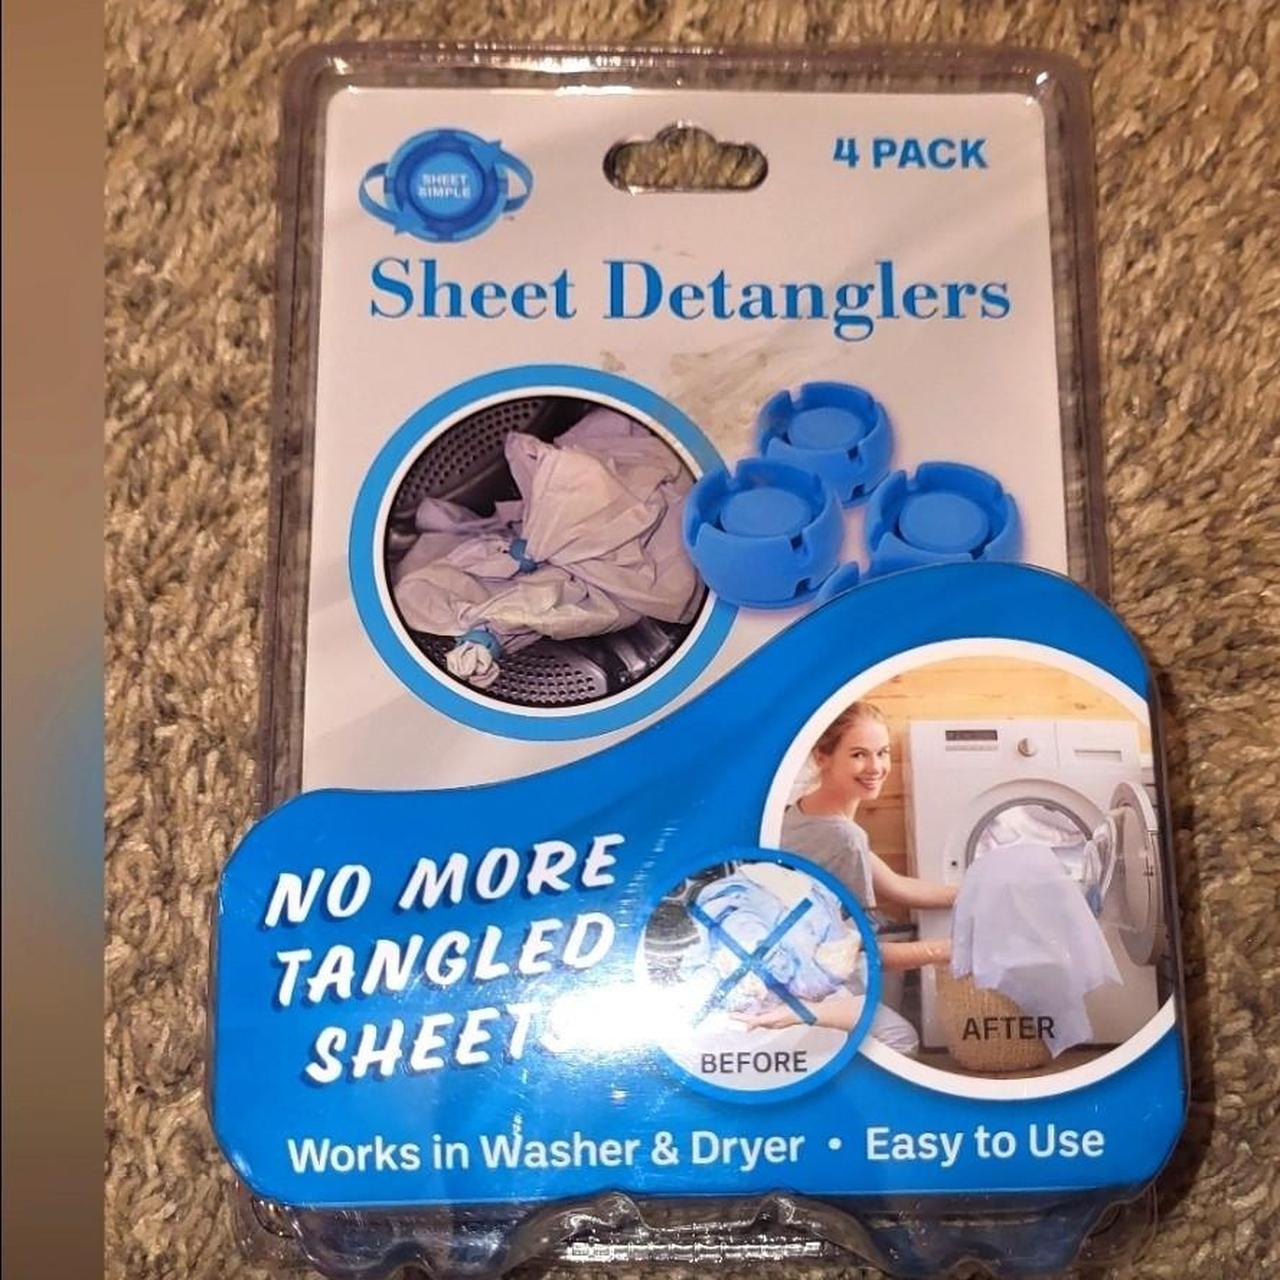 Washer & Dryer Bed Sheet Detangler Prevents Laundry Tangles and Wads